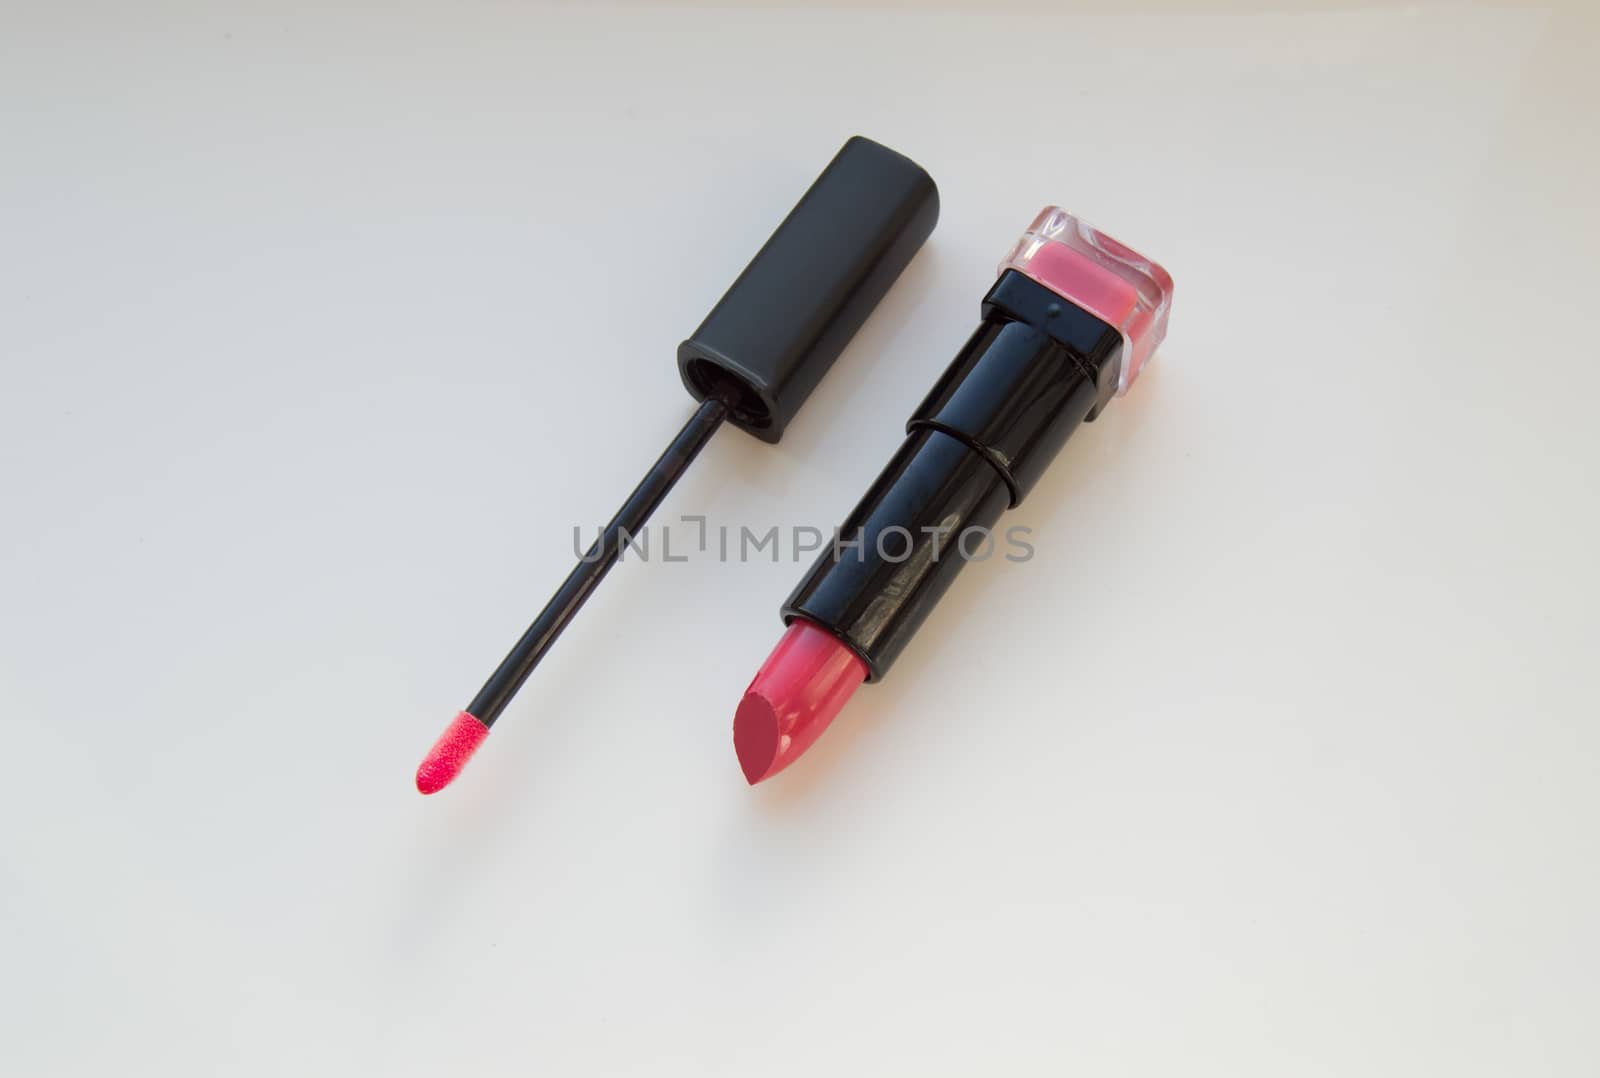 brush for lipgloss, lipstick red, pink on white background.